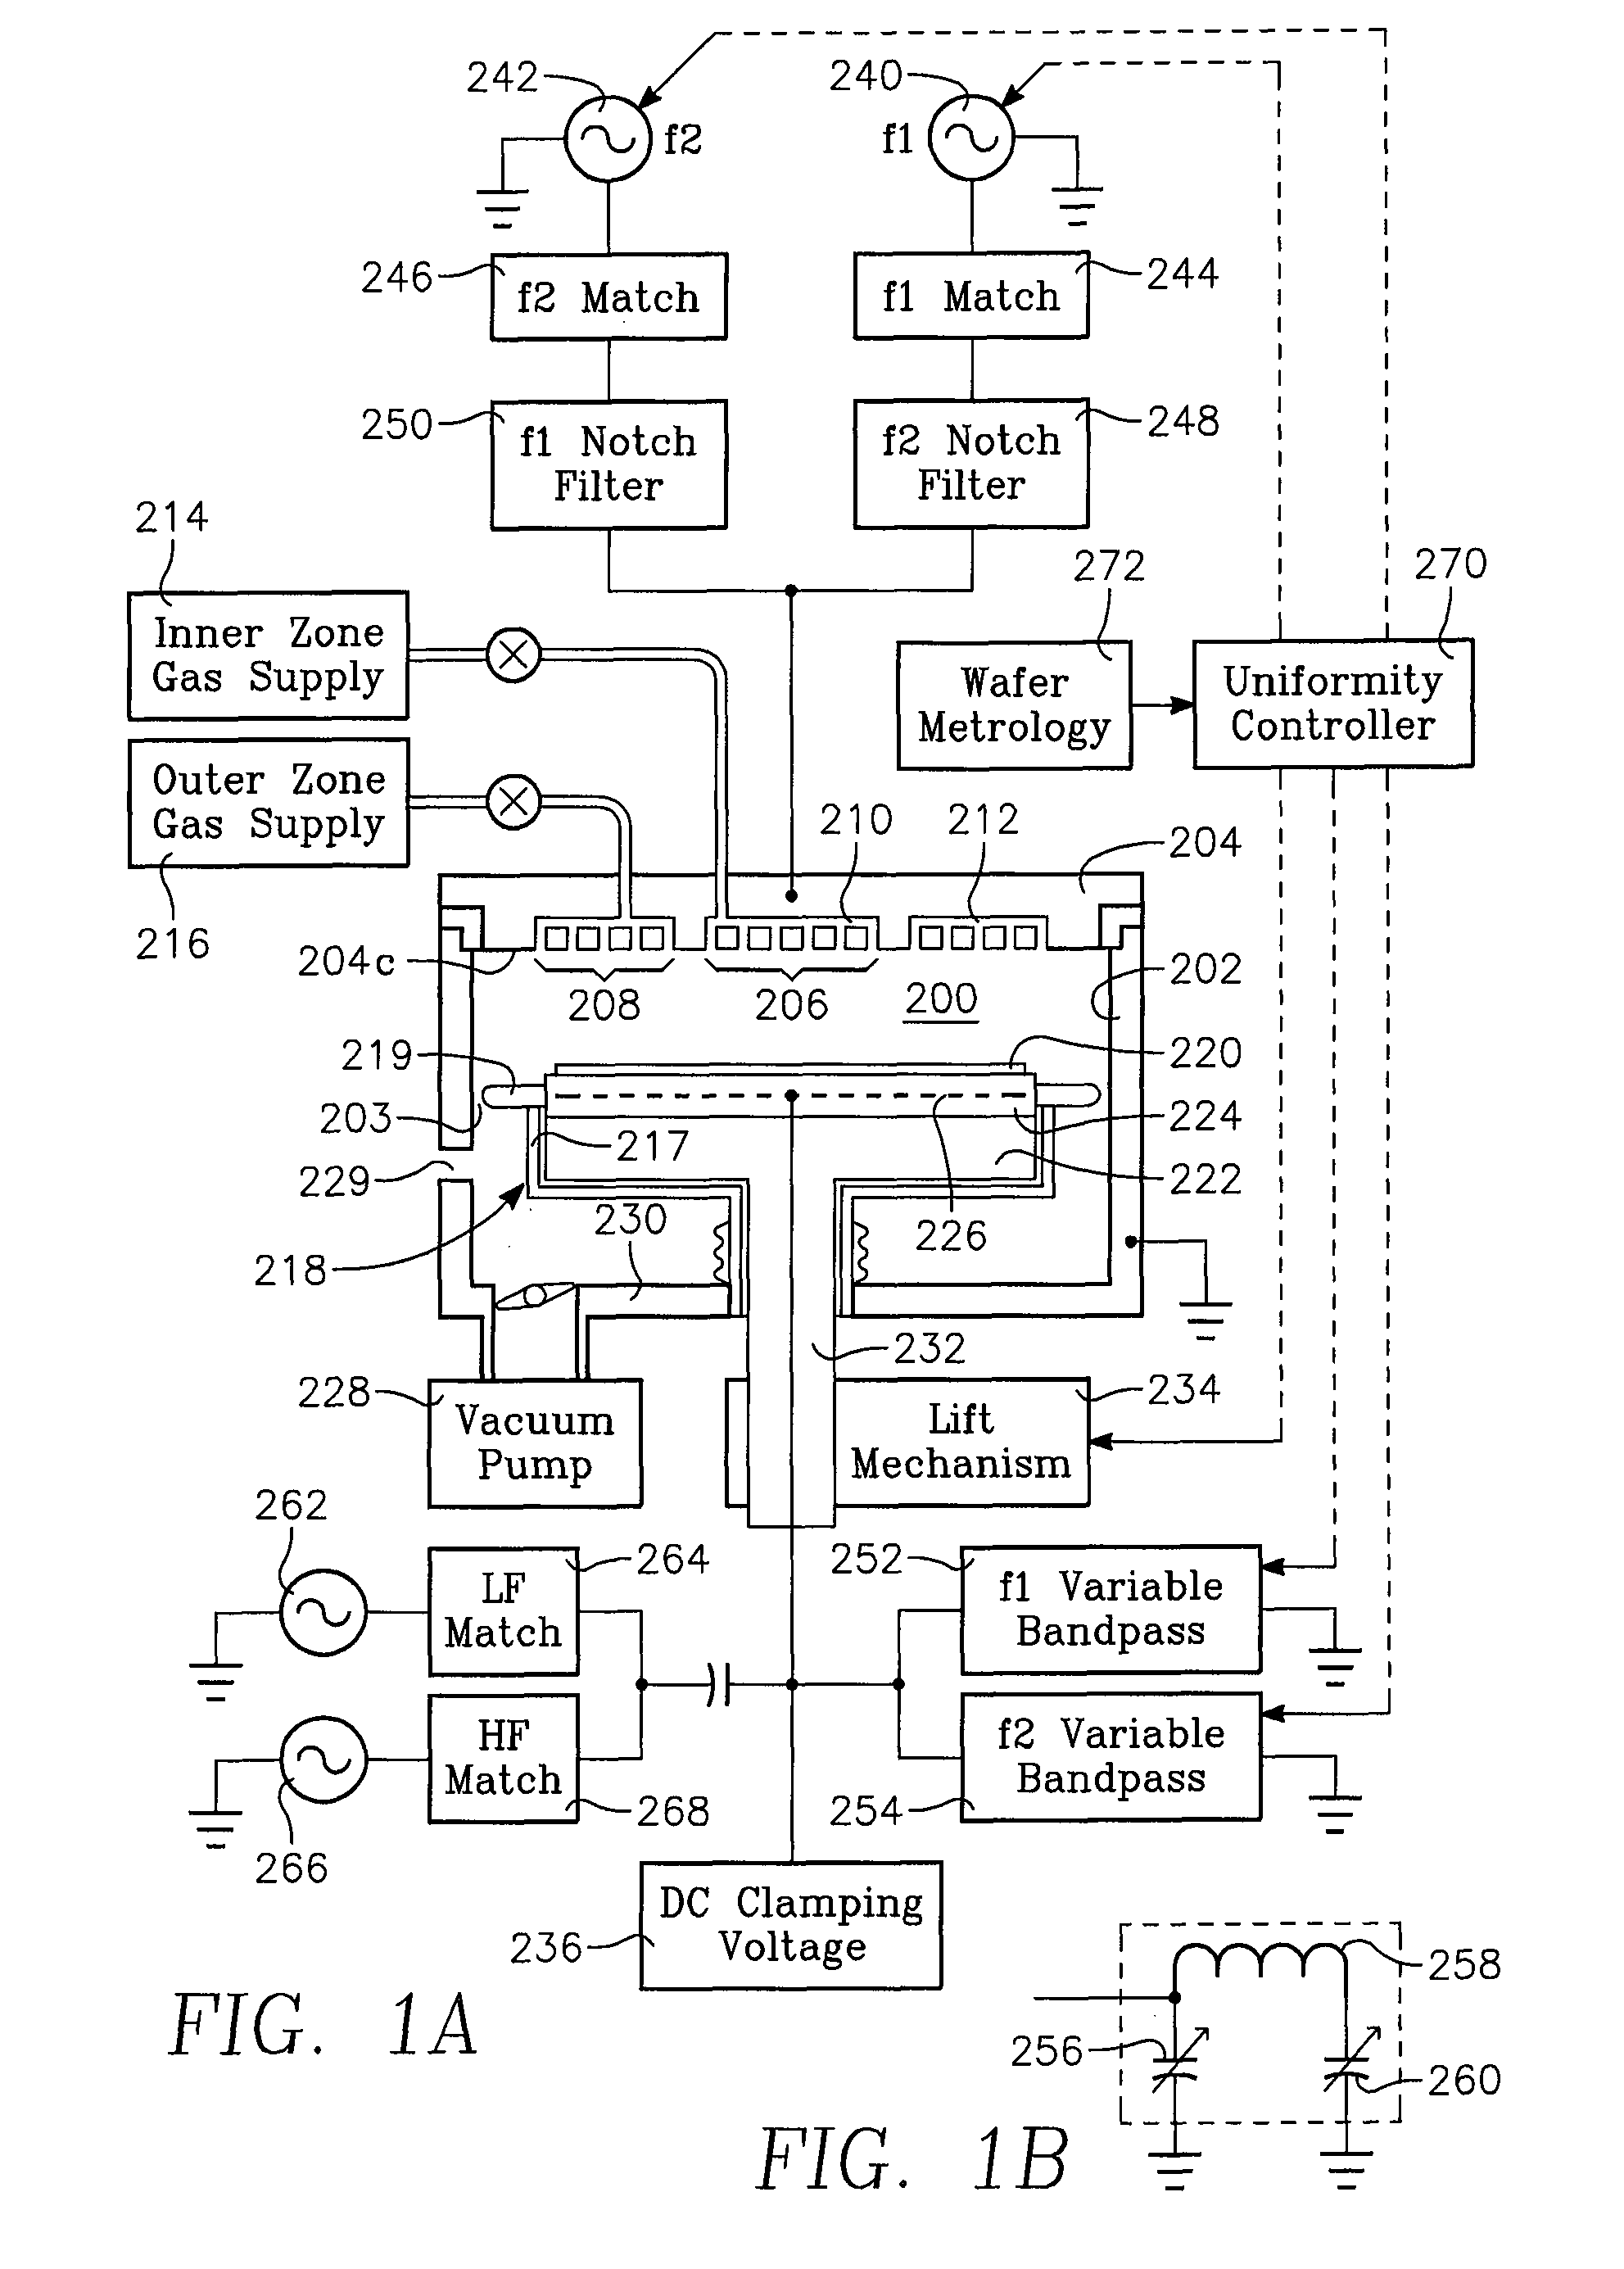 Method of processing a workpiece in a plasma reactor with variable height ground return path to control plasma ion density uniformity